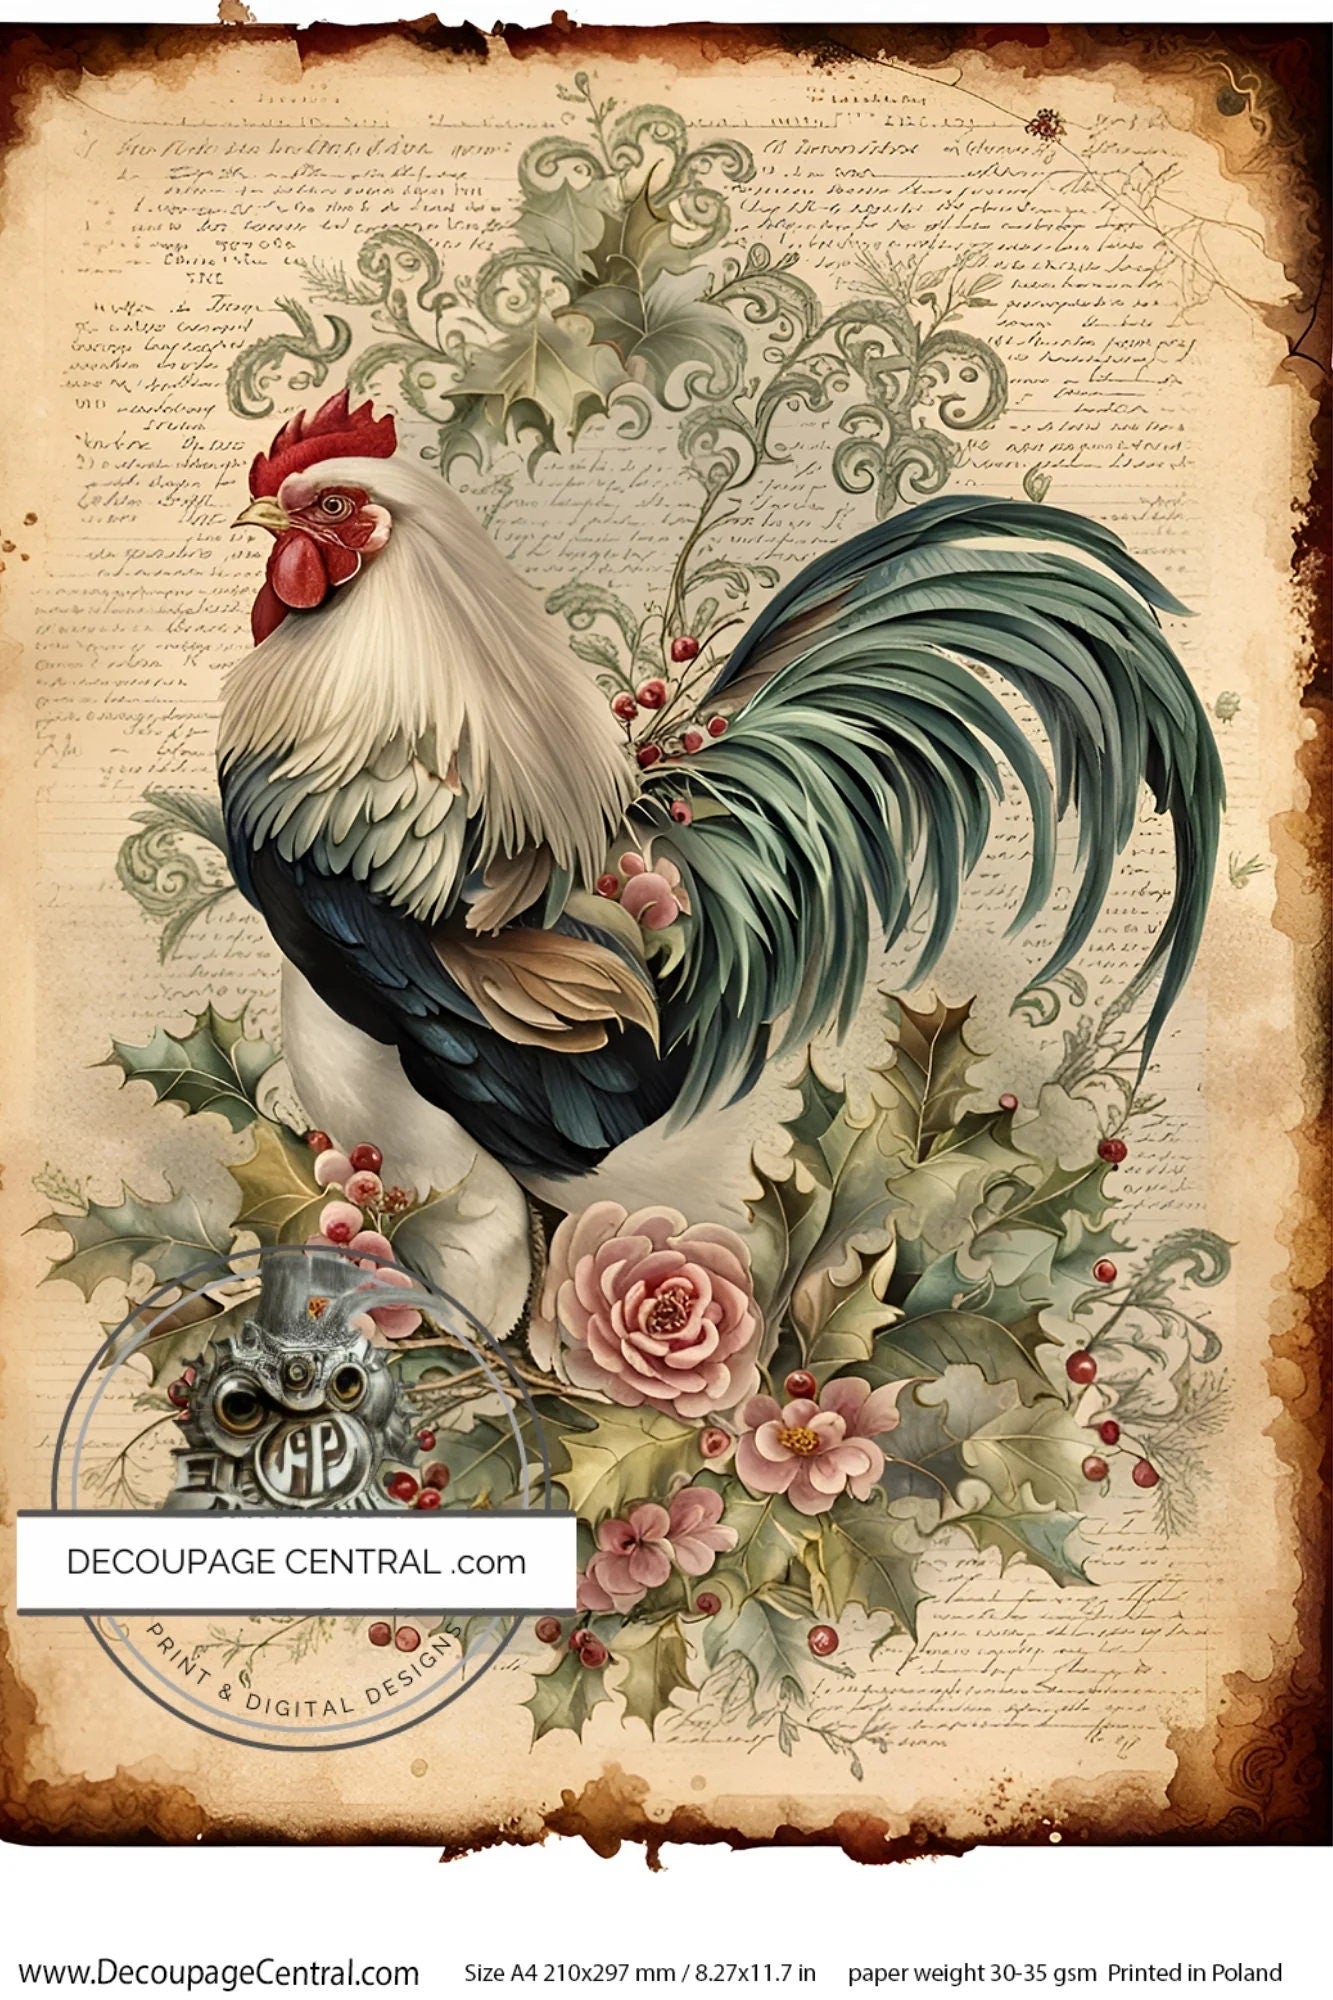 Decoupage Central, Rooster, Flowers, Colorful, Vintage, Shabby Chic Style, DC113, Rice Paper, Decoupage, Mixed Media, A4 8.27x11.69